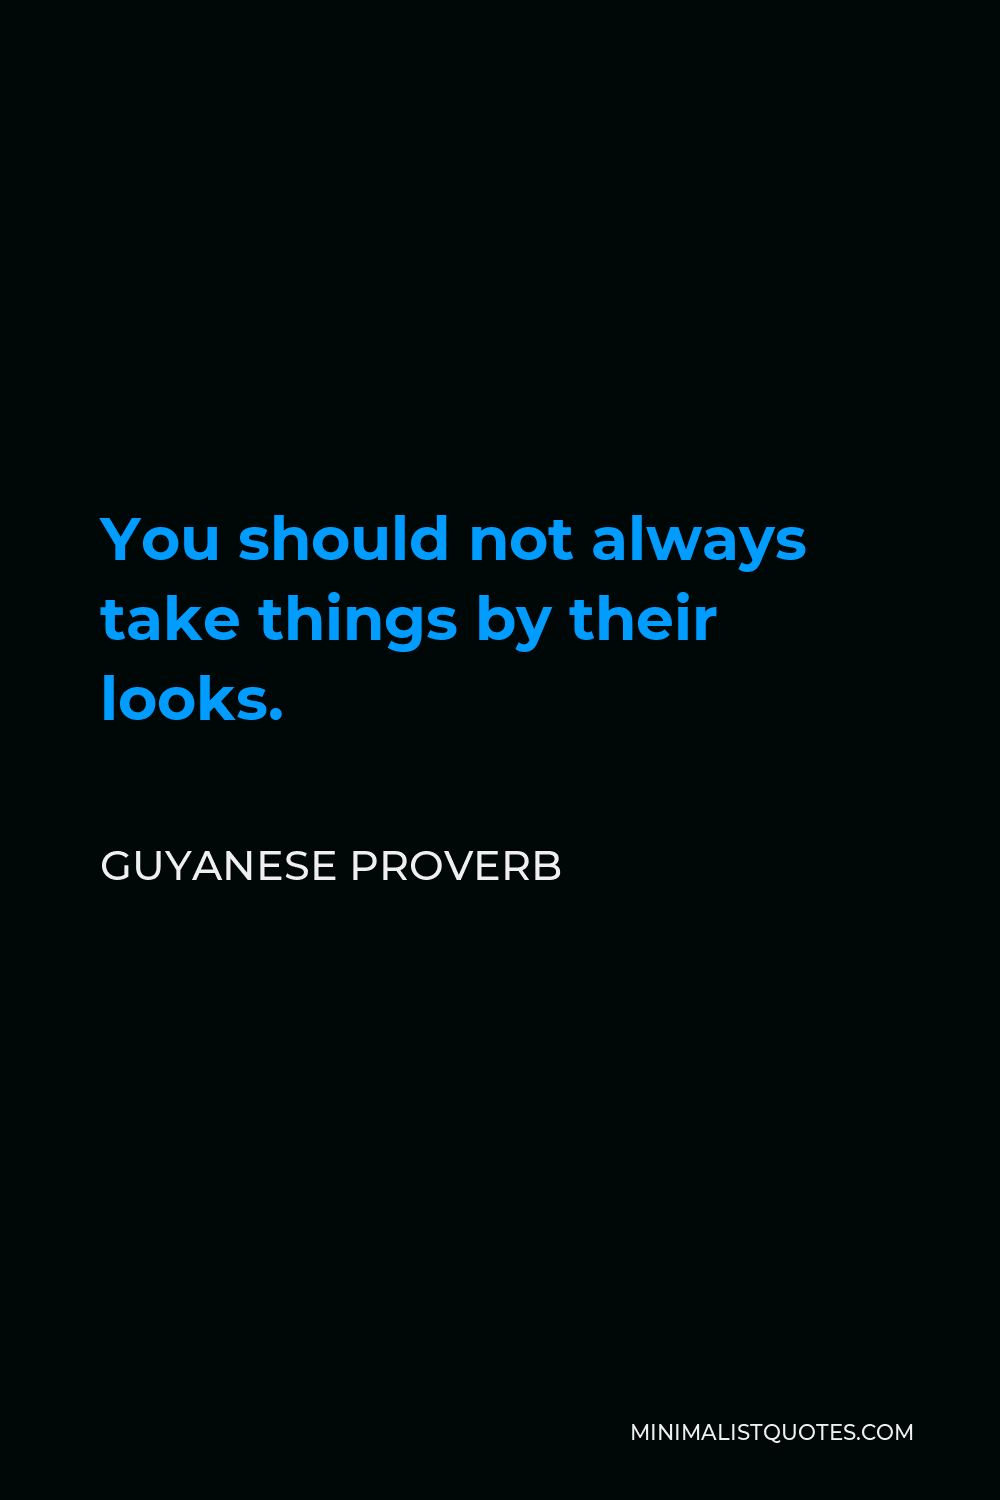 Guyanese Proverb Quote - You should not always take things by their looks.